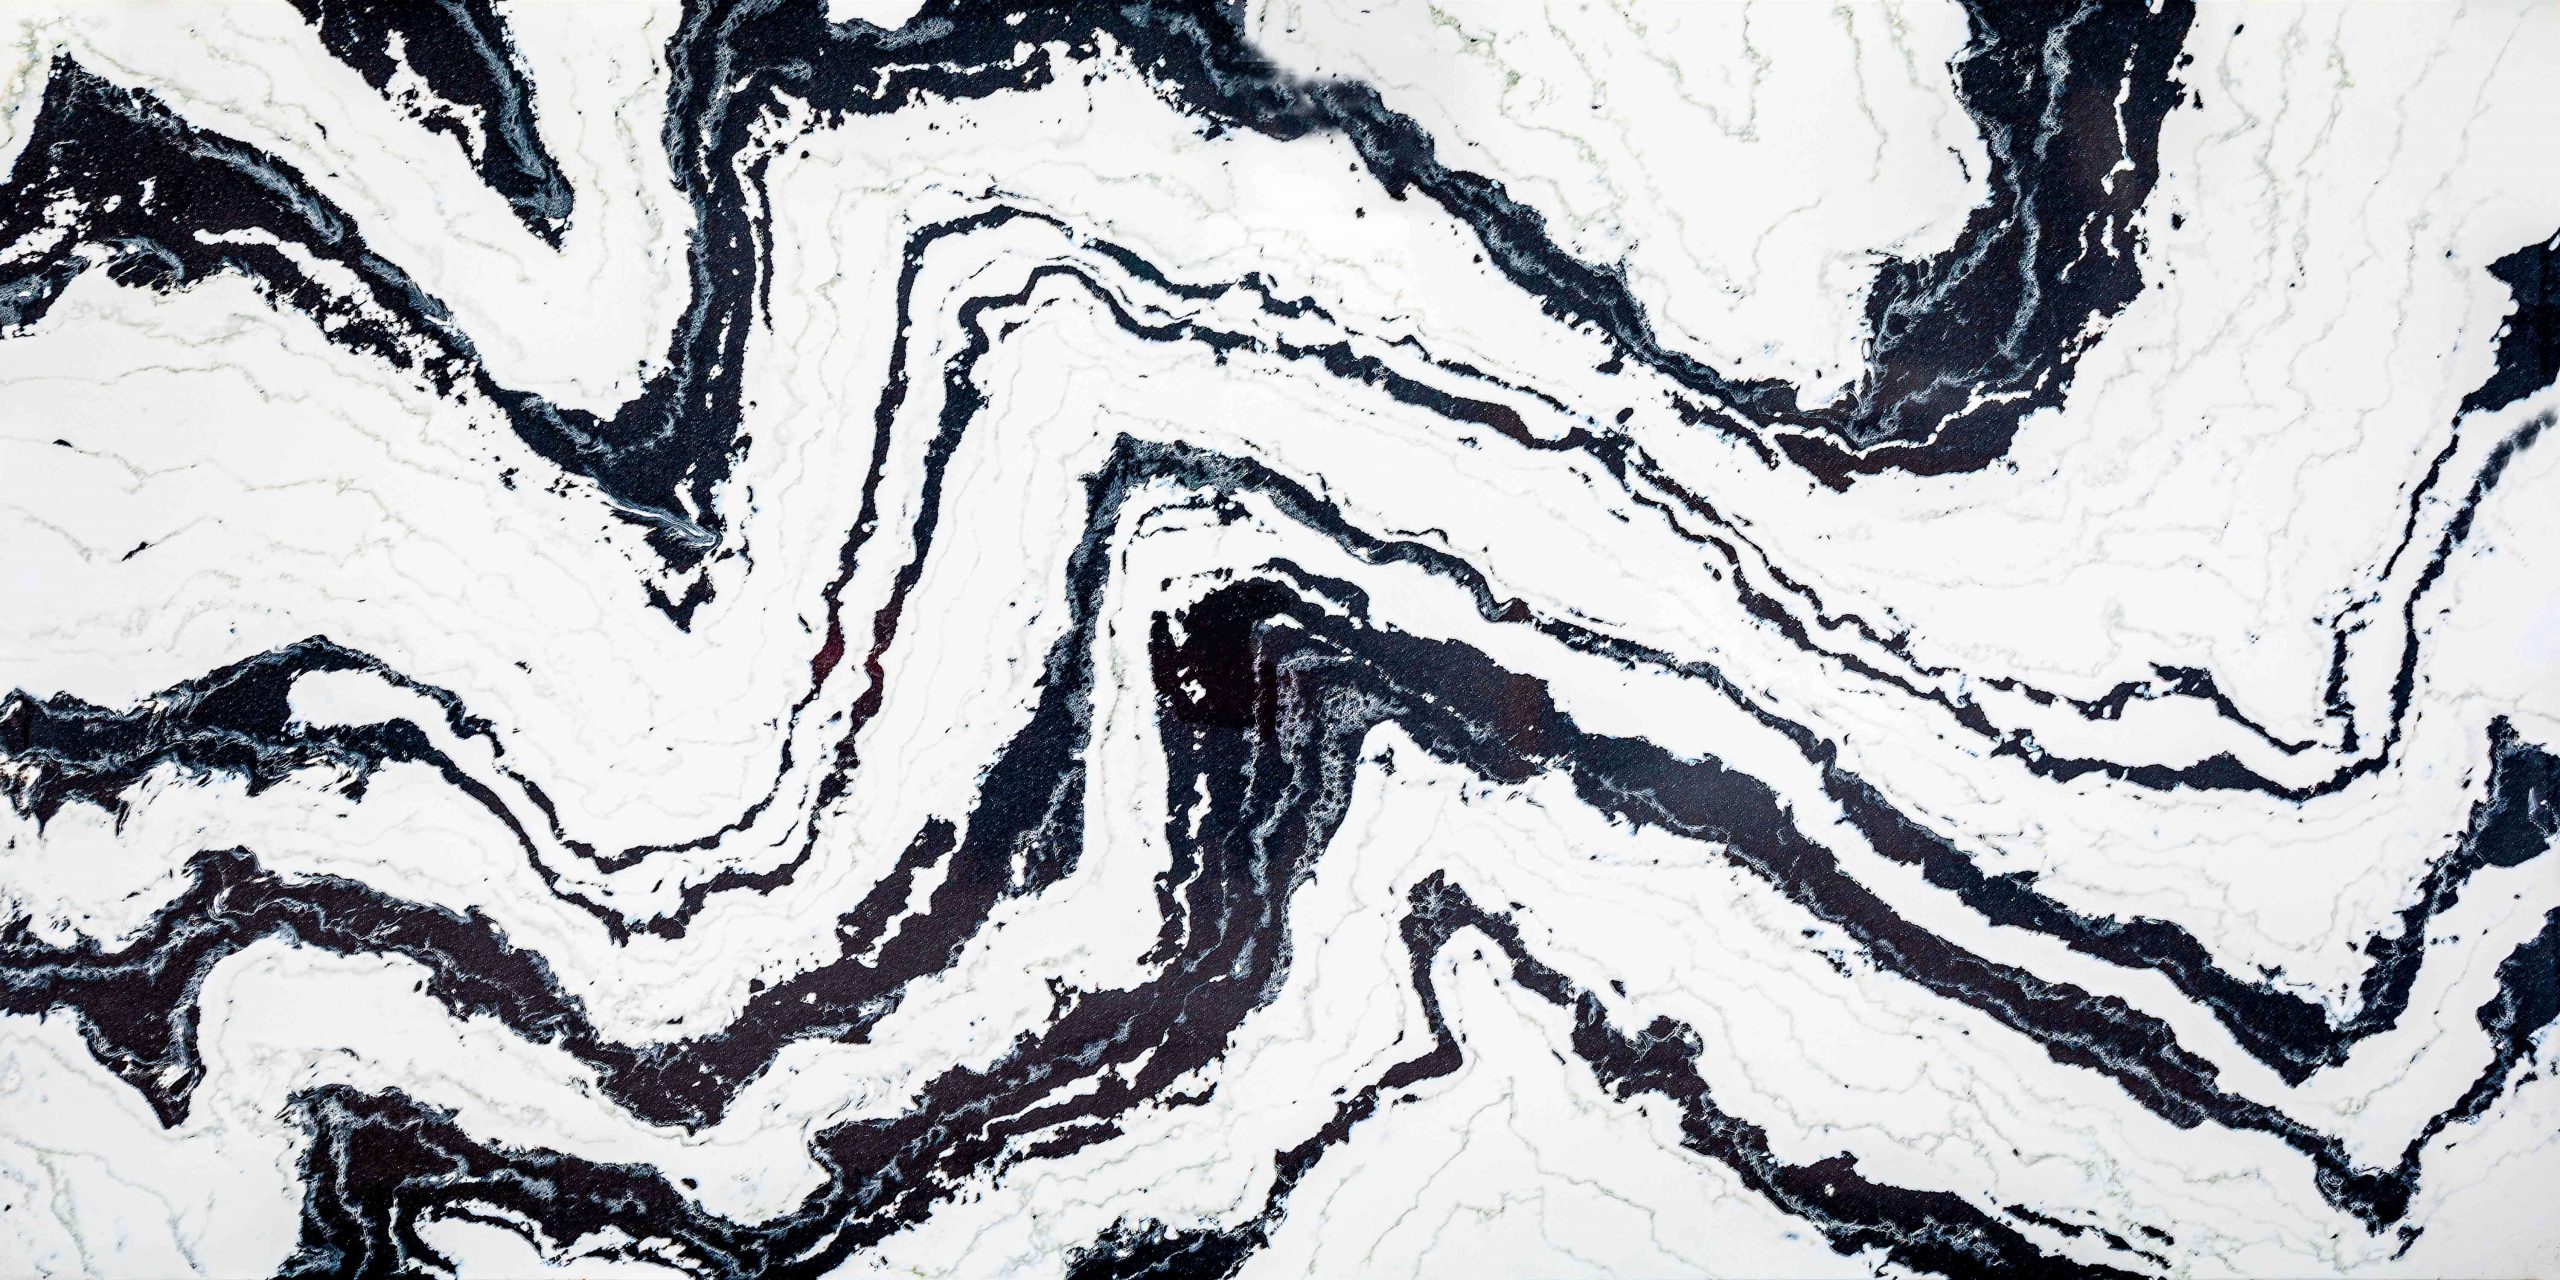 Legendary Stone - Melusine White and Black quartz exclusively from The Beauty of Marble Limited